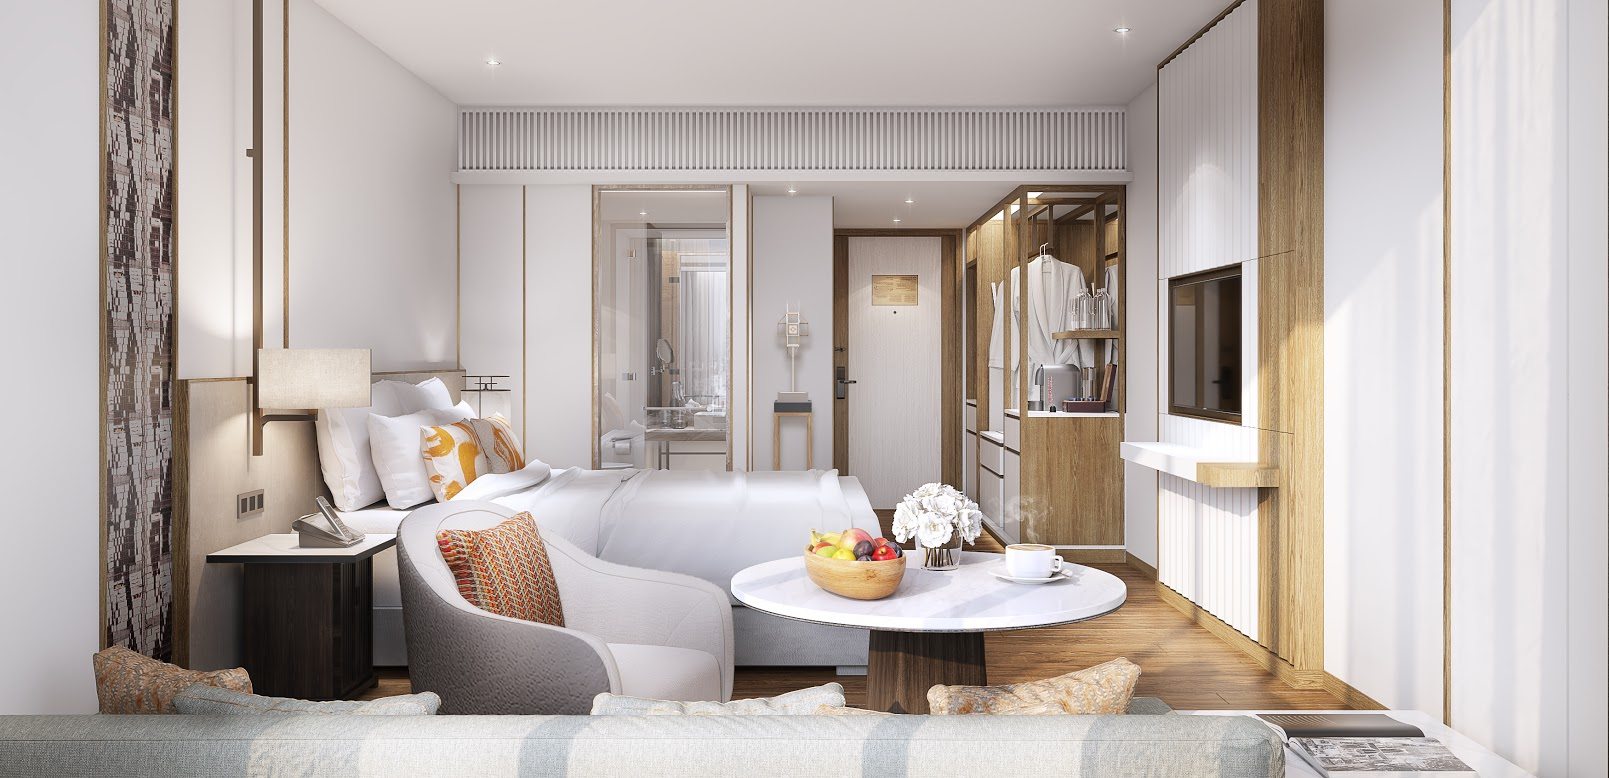 A room at the Melia Chiang Mai, which will open in the city centre of Chiang Mai, Thailand, in the fourth quarter of this year. Photo: Handout